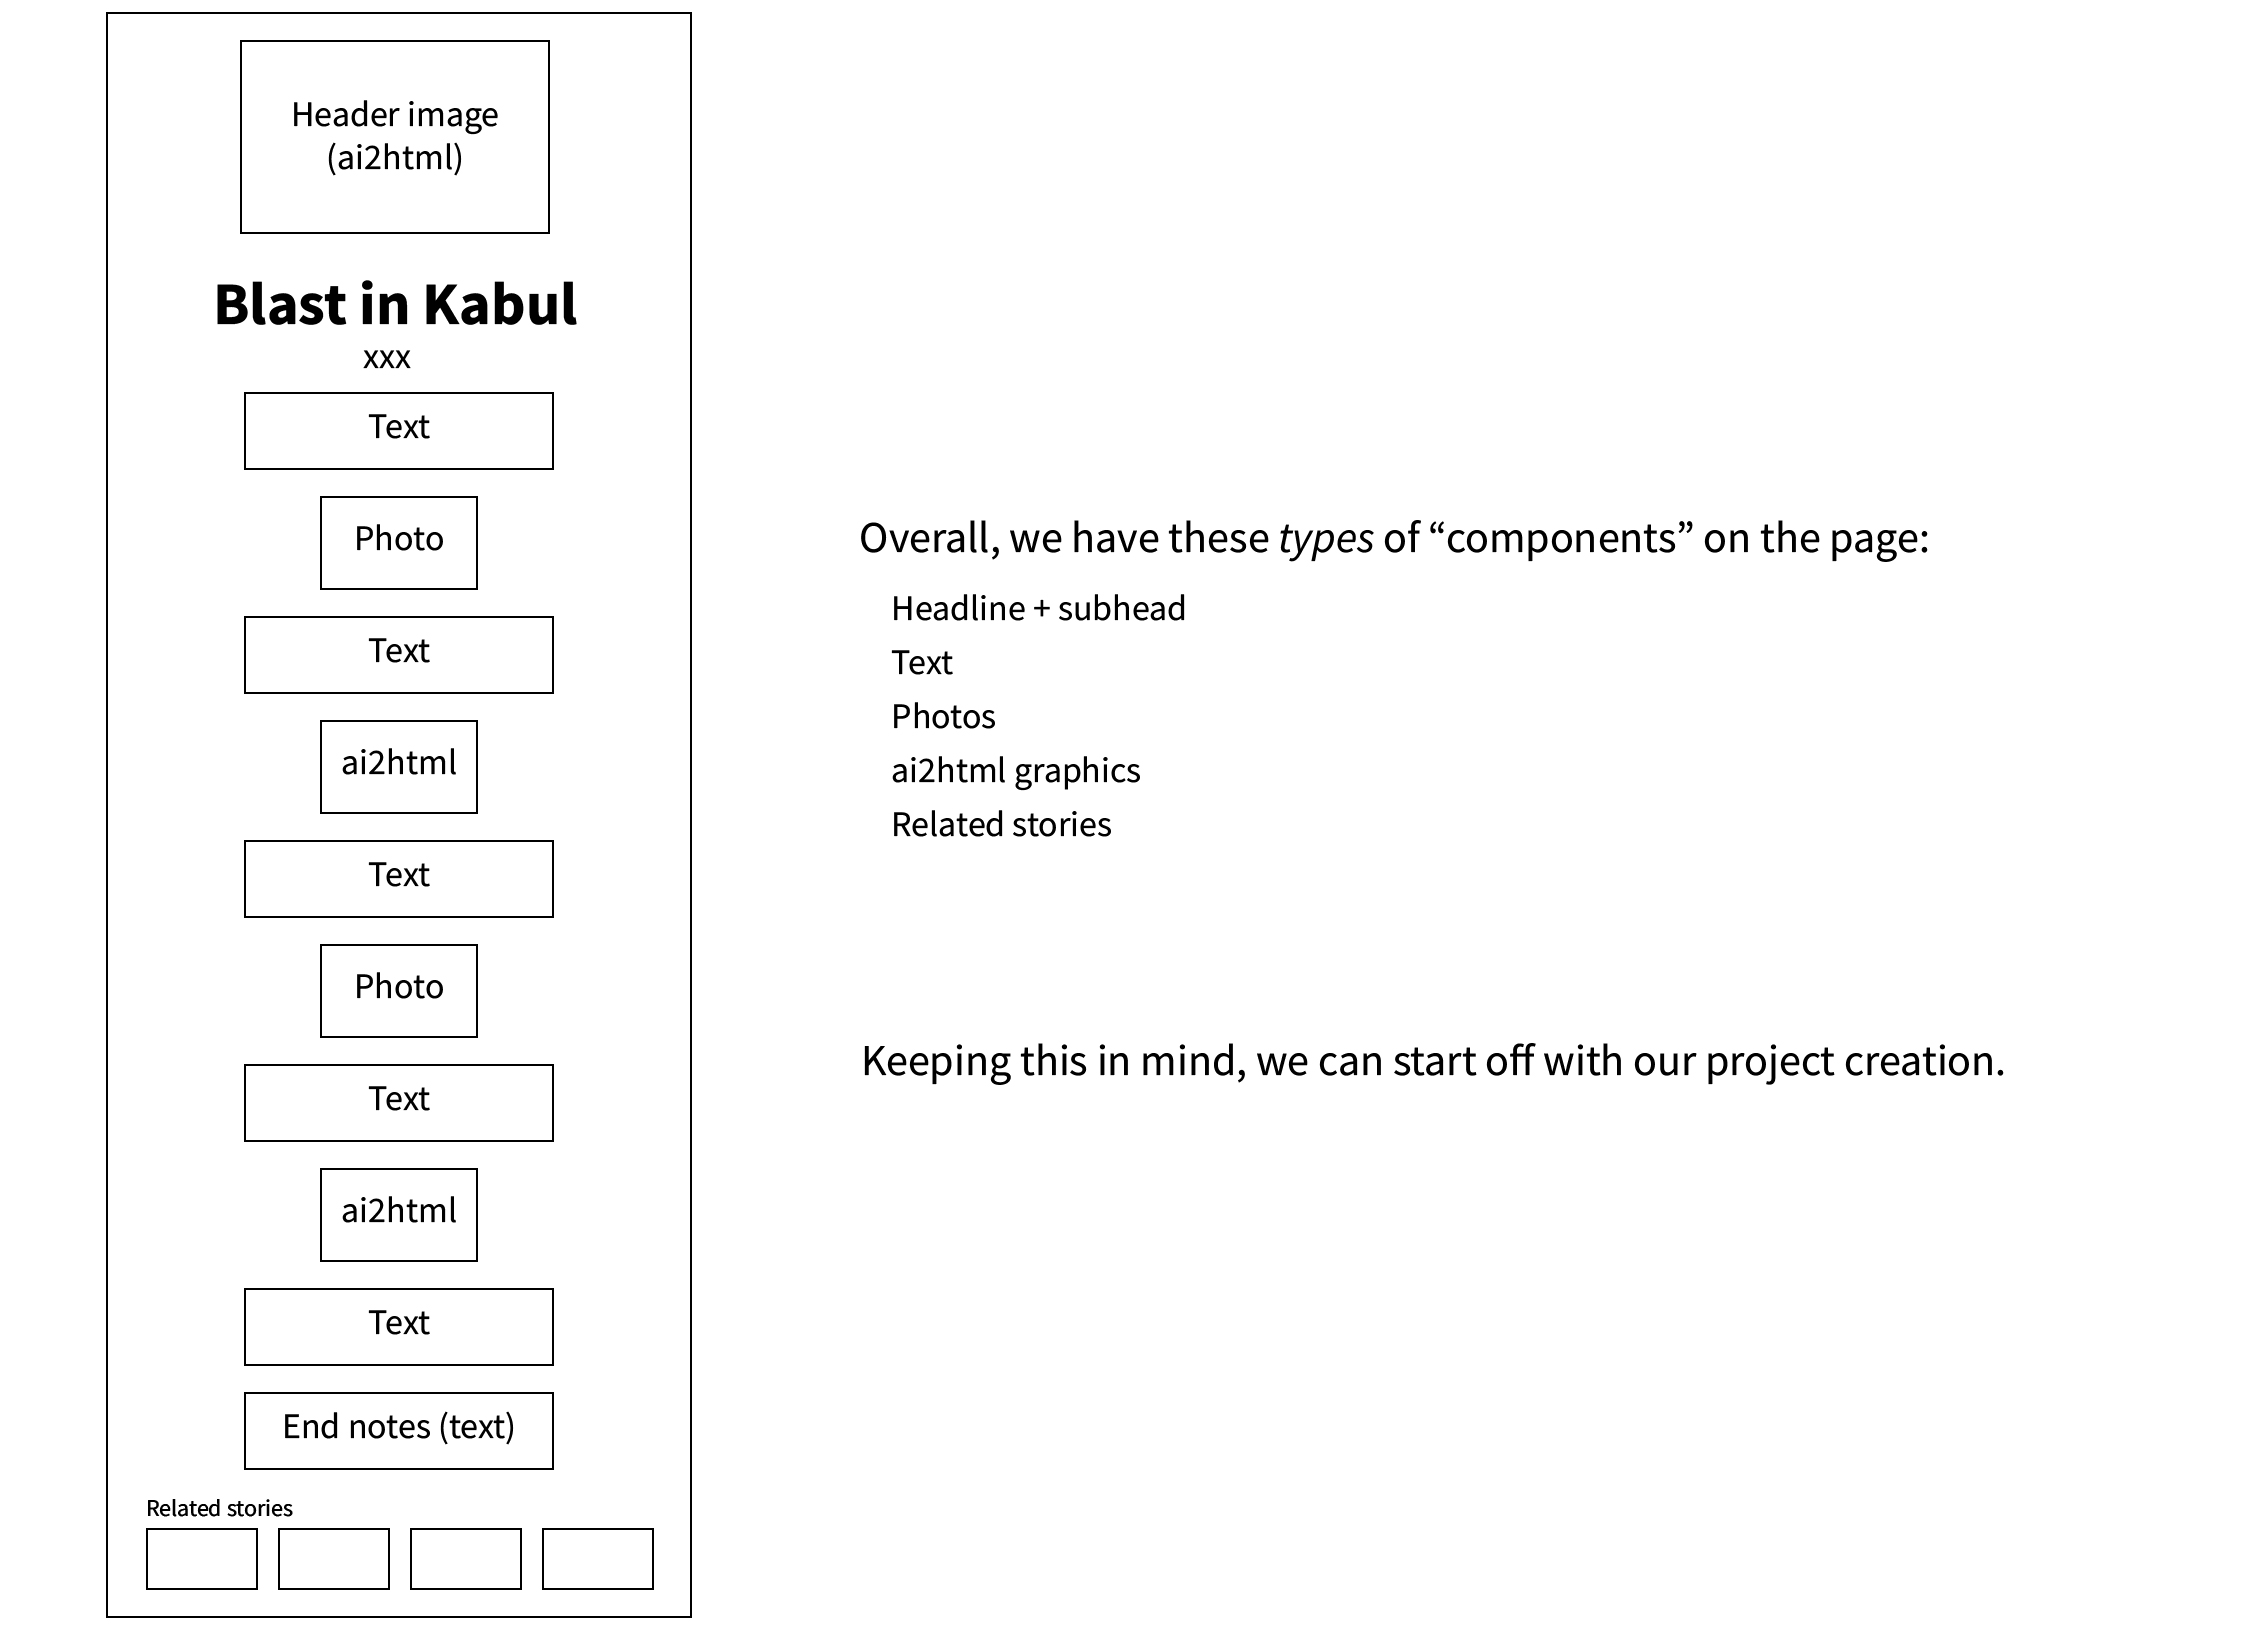 Kabul page's components